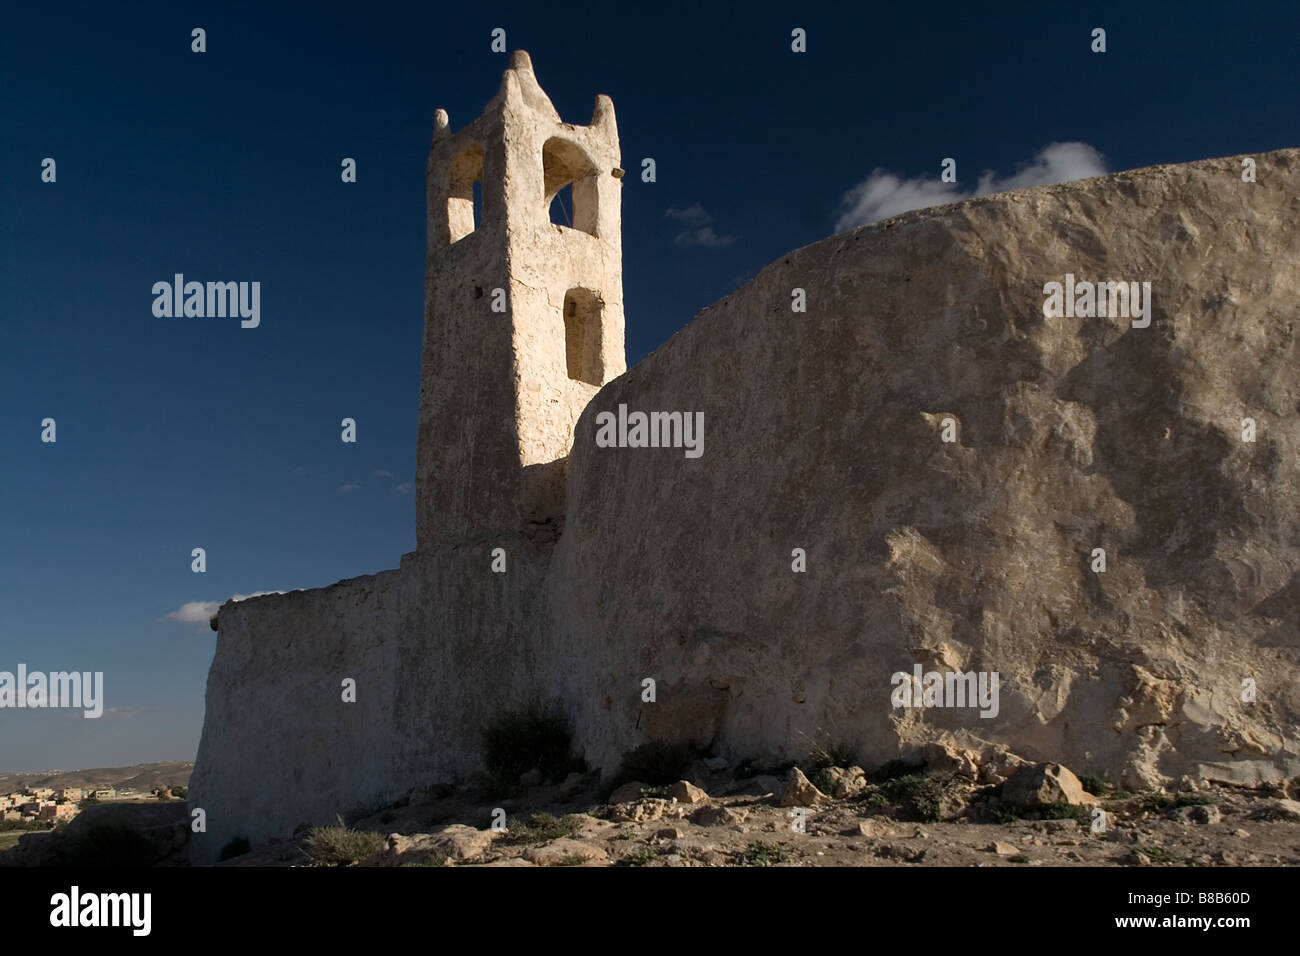 Princess mosque near Yefren, Libya. An example of early islamic architecture, picturesquely located near Yefren - Gharyan road. Stock Photo